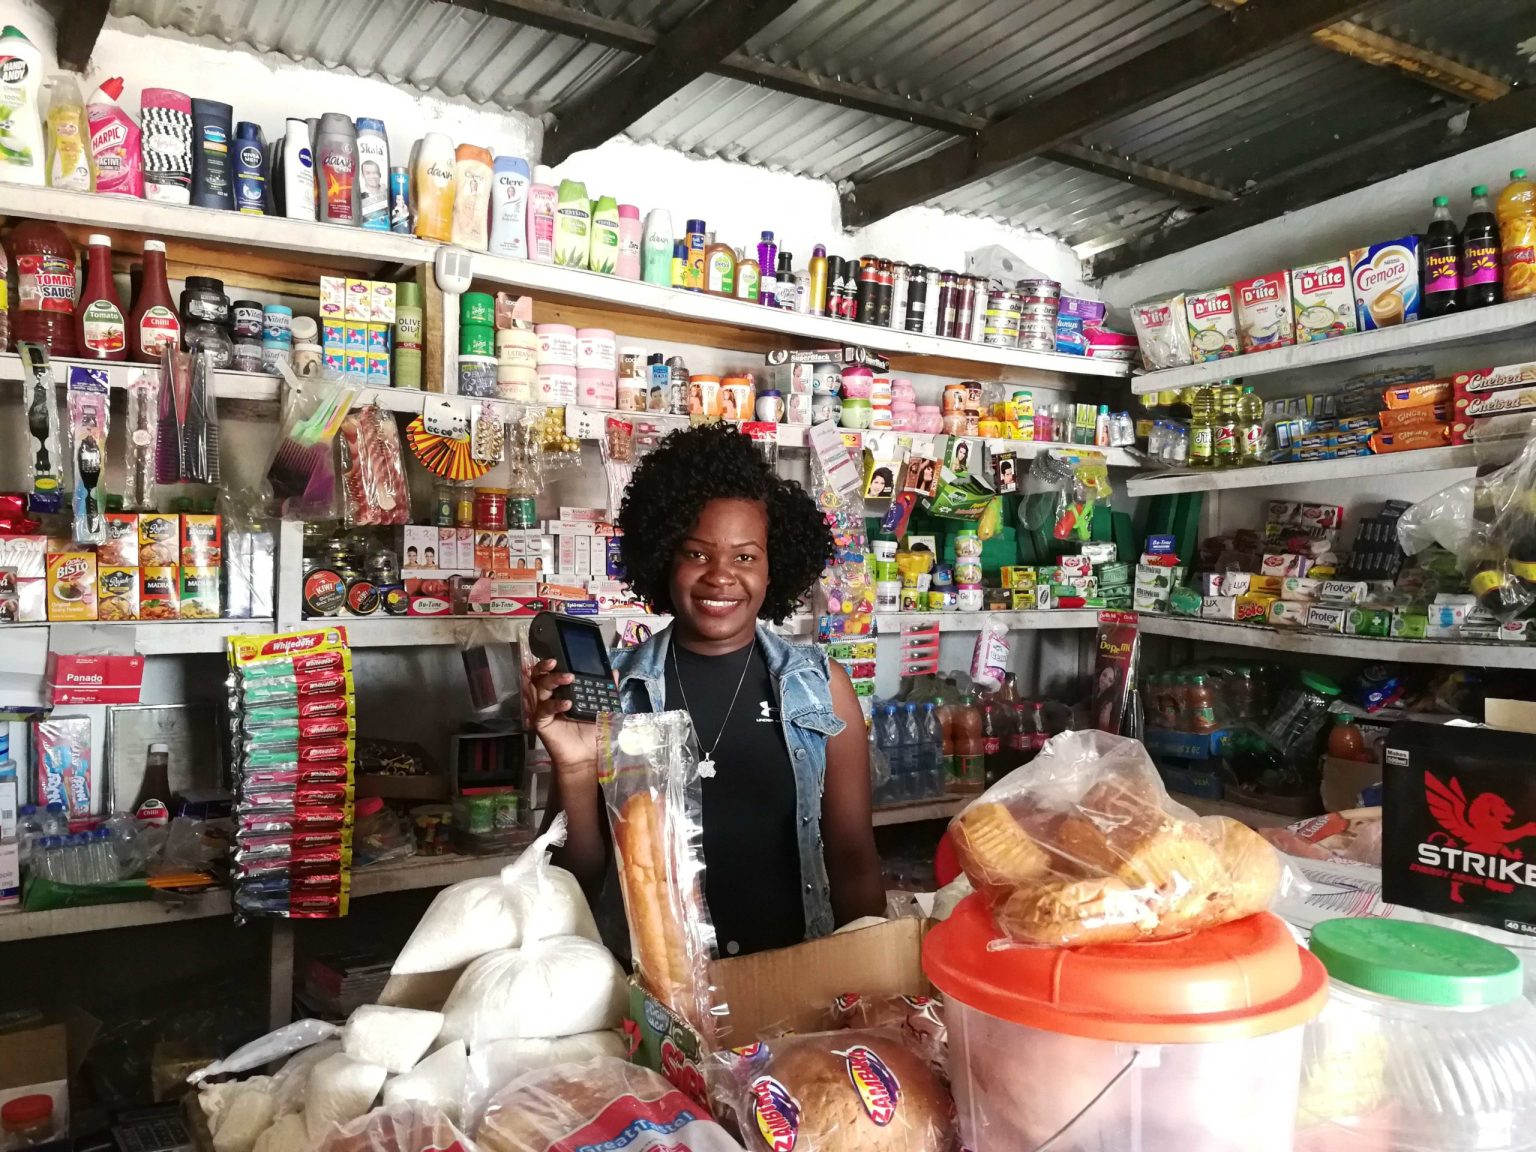 Nomanini. The StockNow app connects informal retailers to distributors of global fast moving consumer brands relevant in the general trade market. www.theexchange.africa